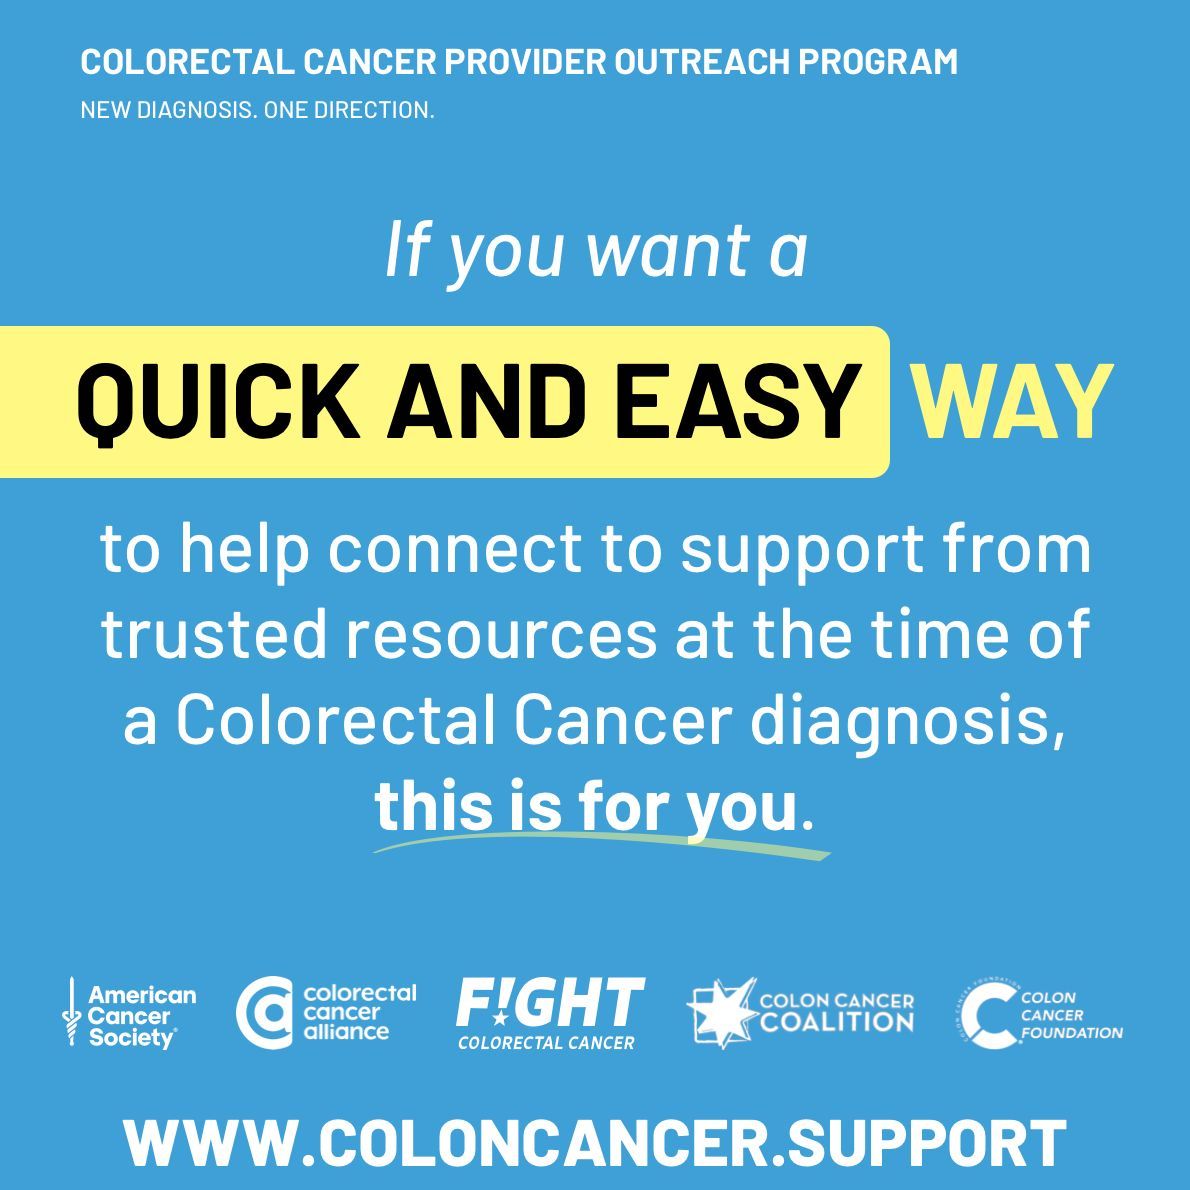 Stay informed, stay healthy! Get the facts about colorectal cancer today. 👍 

💙 Visit colorectalcancer.support 💙 

#ColorectalCancer #CRC #ColonCancer #ScreeningsSaveLives #CancerAwareness #BlueForCRC #NeverTooYoung #FightCRC #ColonCancerAwareness #ColorectalCancerAwareness